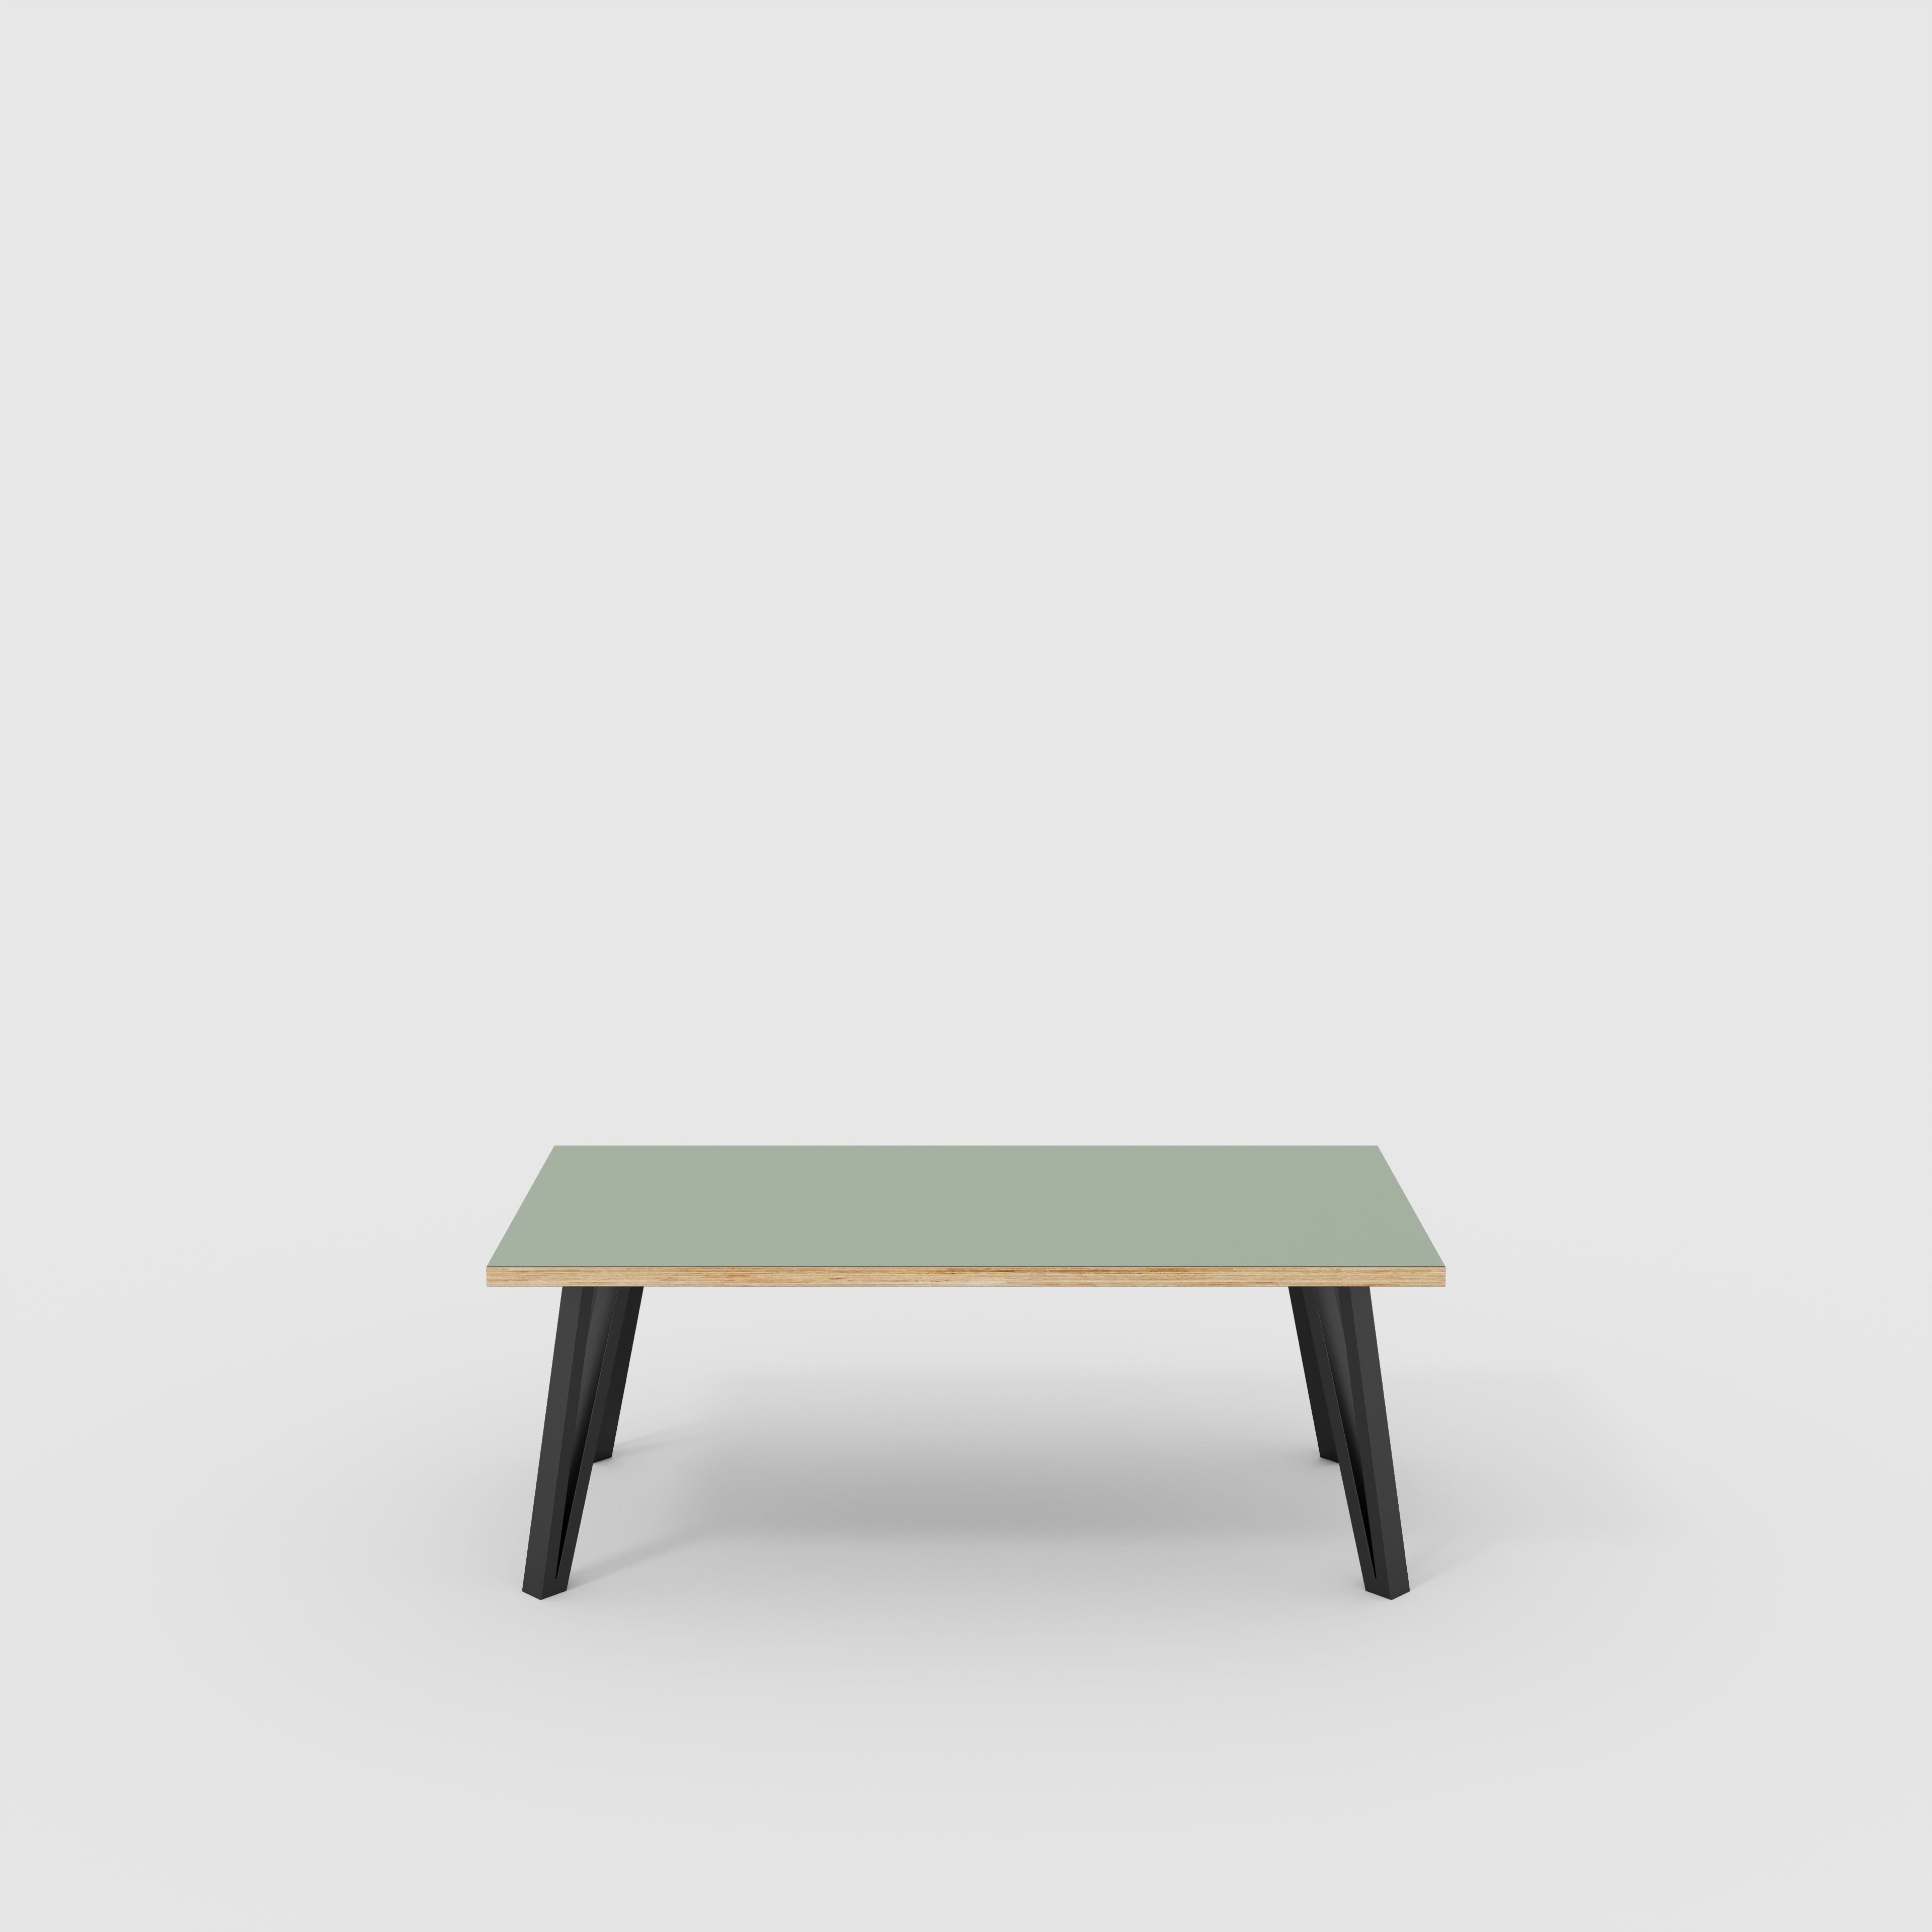 Coffee Table with Black Box Hairpin Legs - Formica Green Slate - 1200(w) x 600(d) x 425(h)